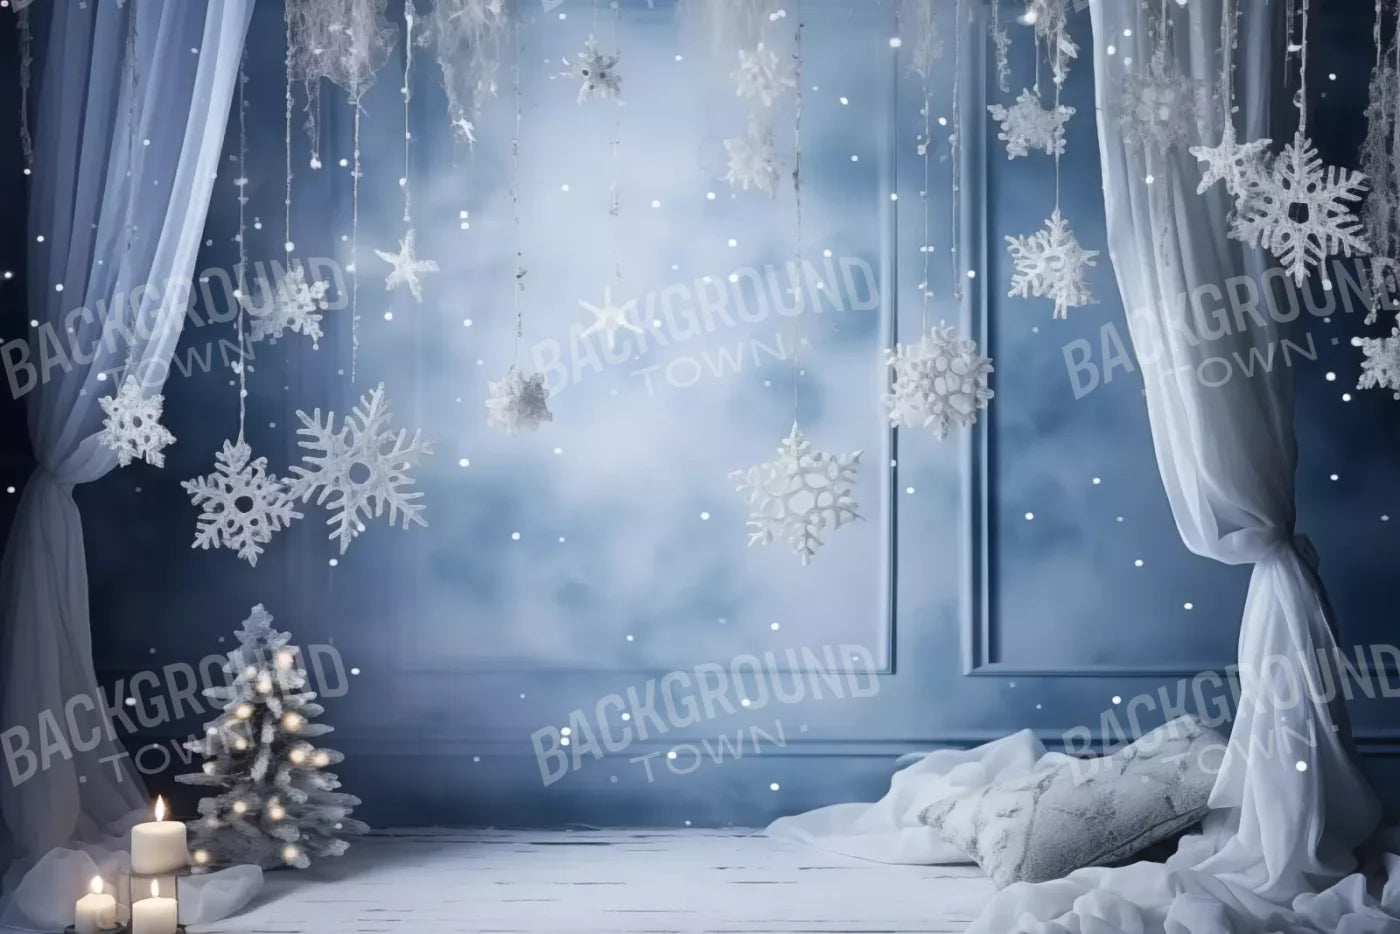 Blue And White Christmas 12X8 Ultracloth ( 144 X 96 Inch ) Backdrop